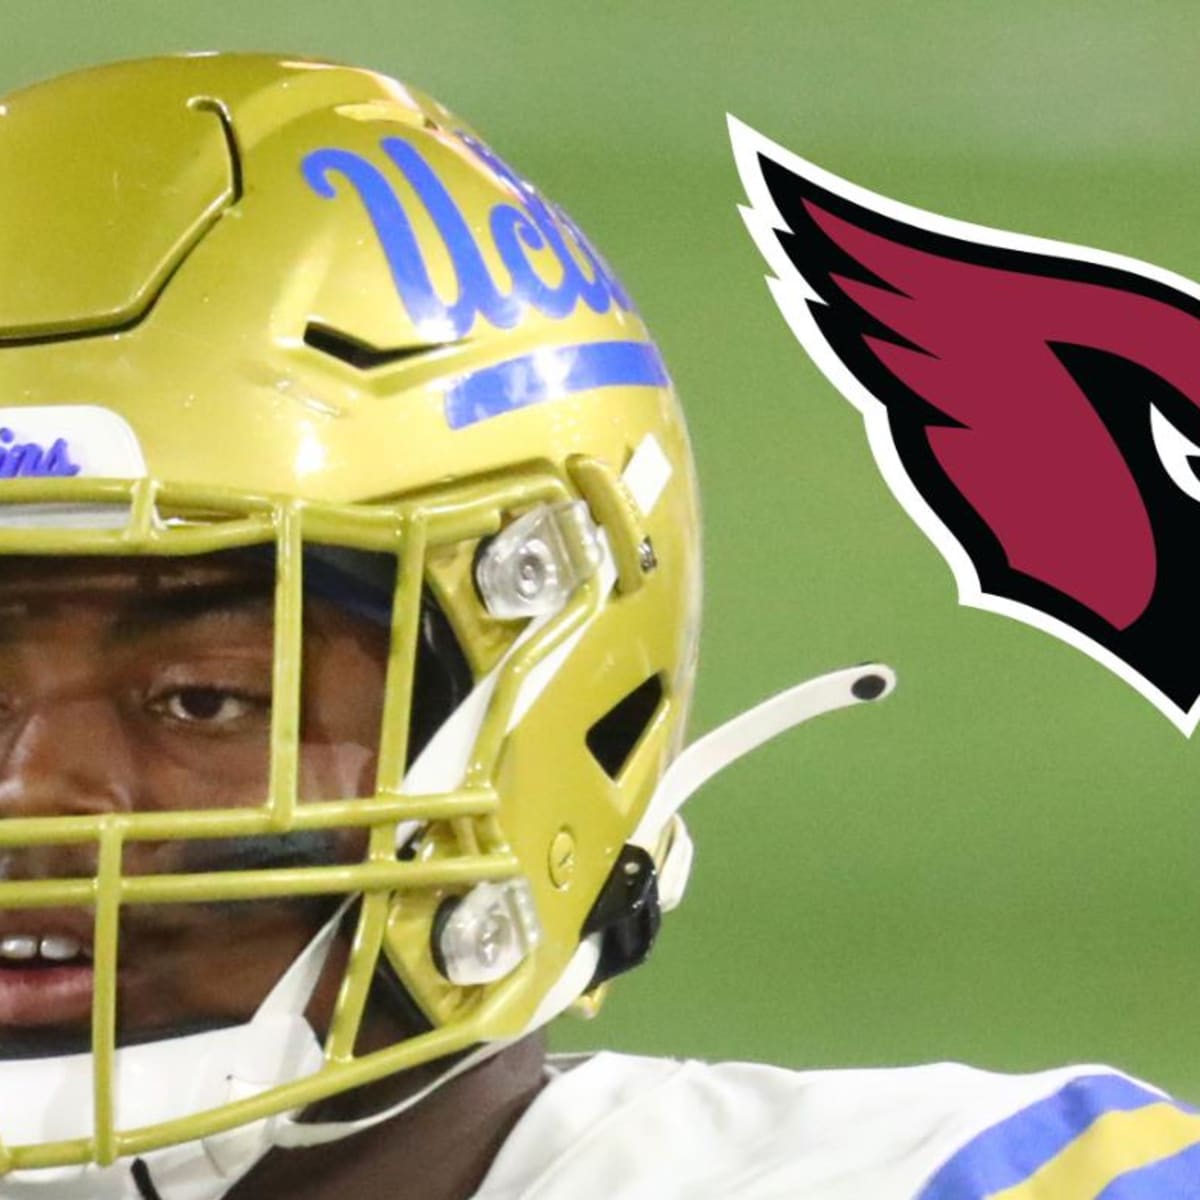 Clayton Tune Selected by Arizona Cardinals - Fit, Grade and Scouting Report  - Sports Illustrated Arizona Cardinals News, Analysis and More